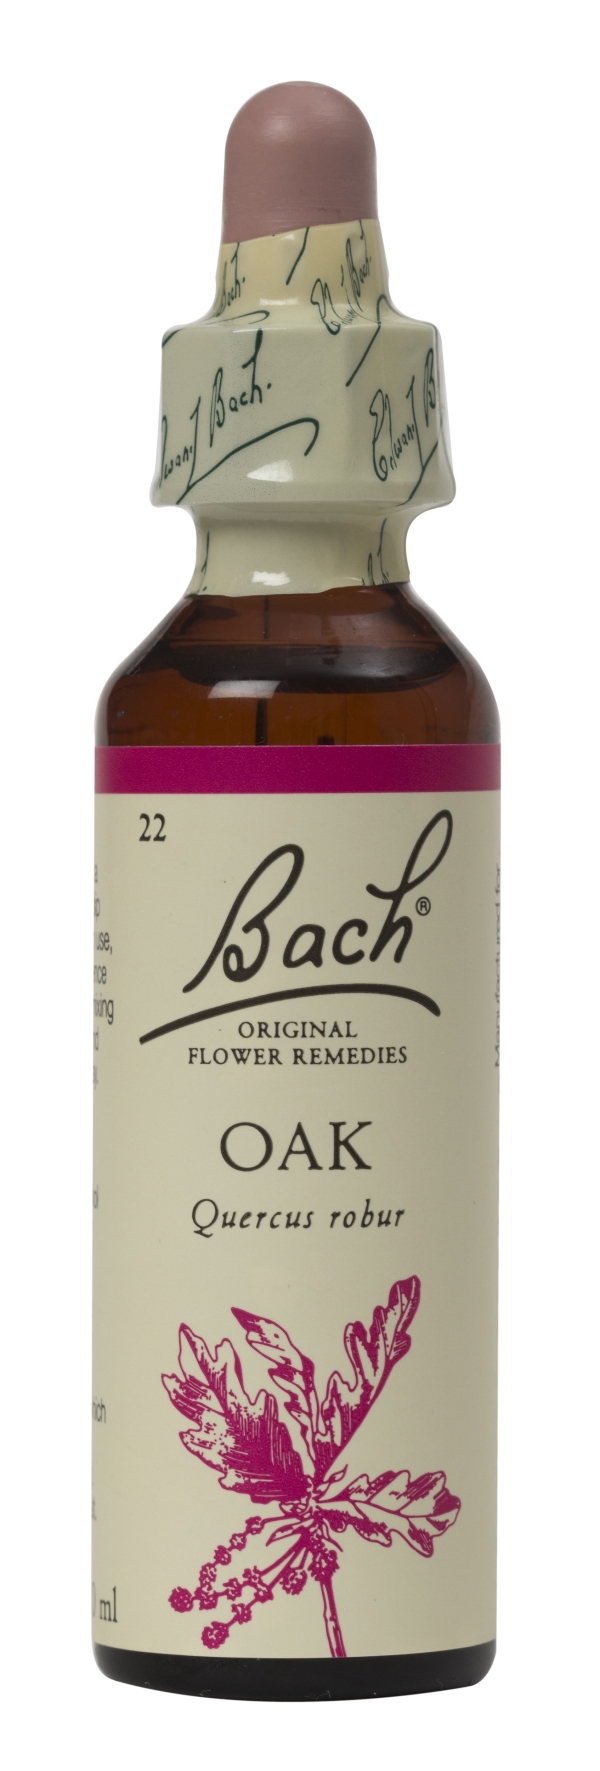 Nelson Bach Flower Remedies: Bach Oak Flower Remedy (20ml) available online here